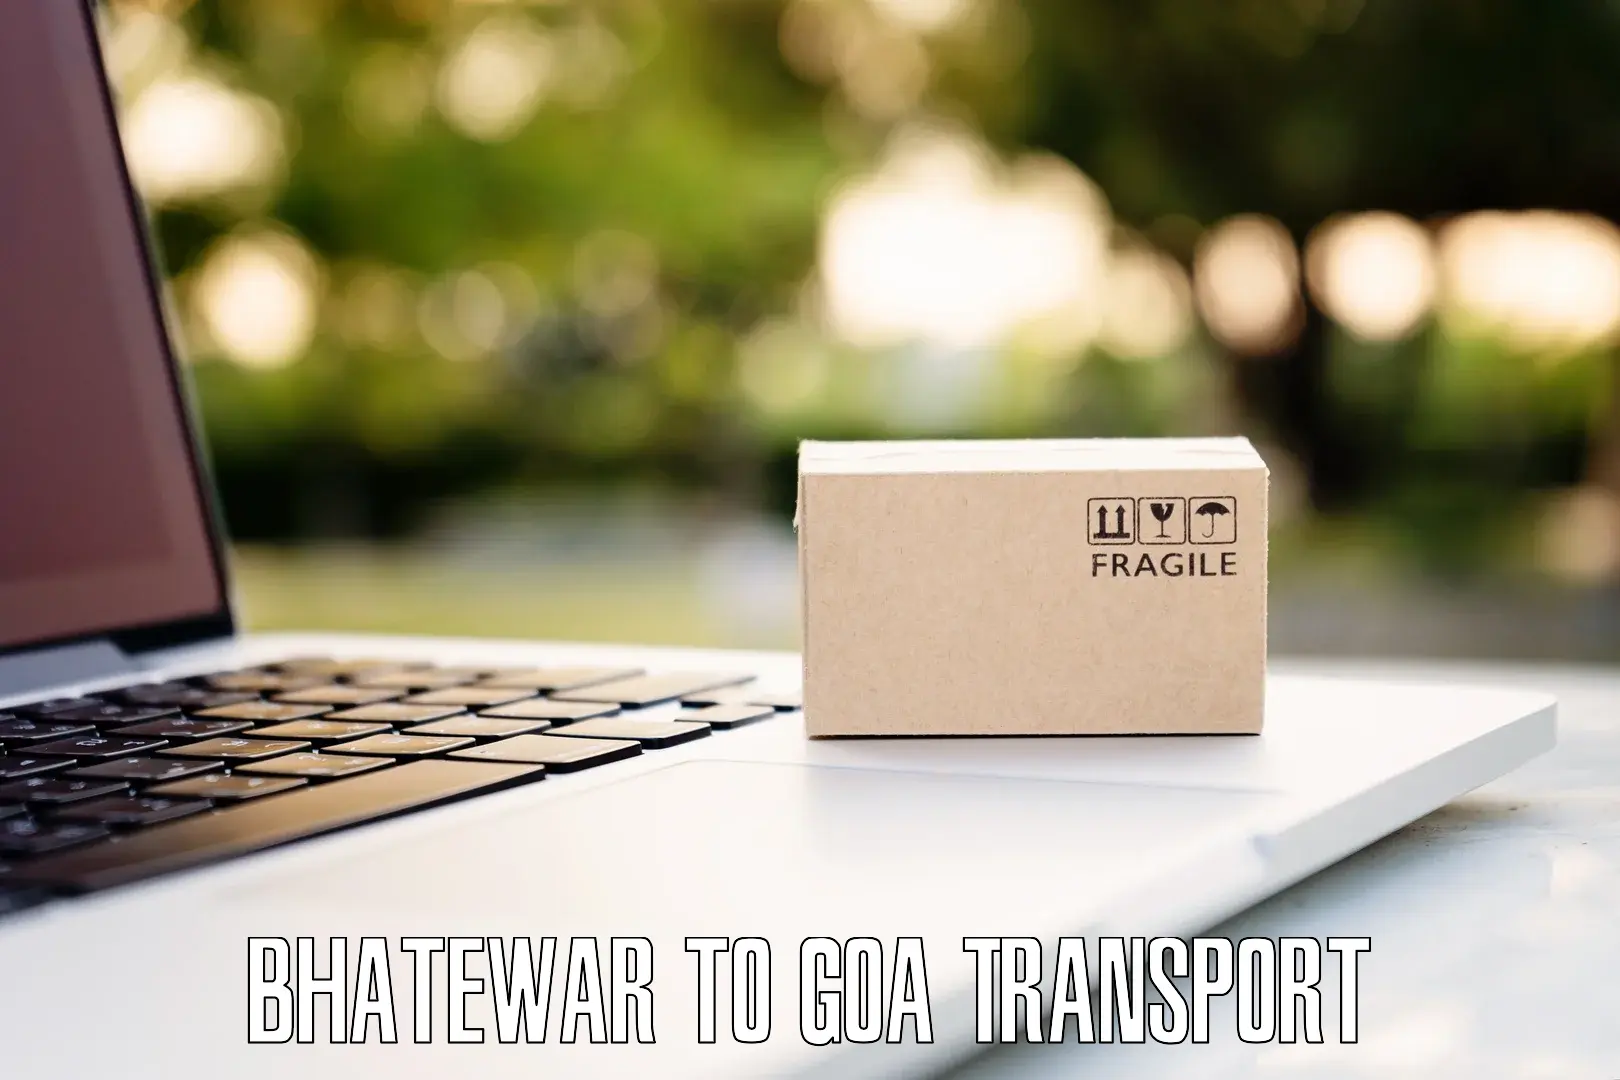 Road transport services Bhatewar to Goa